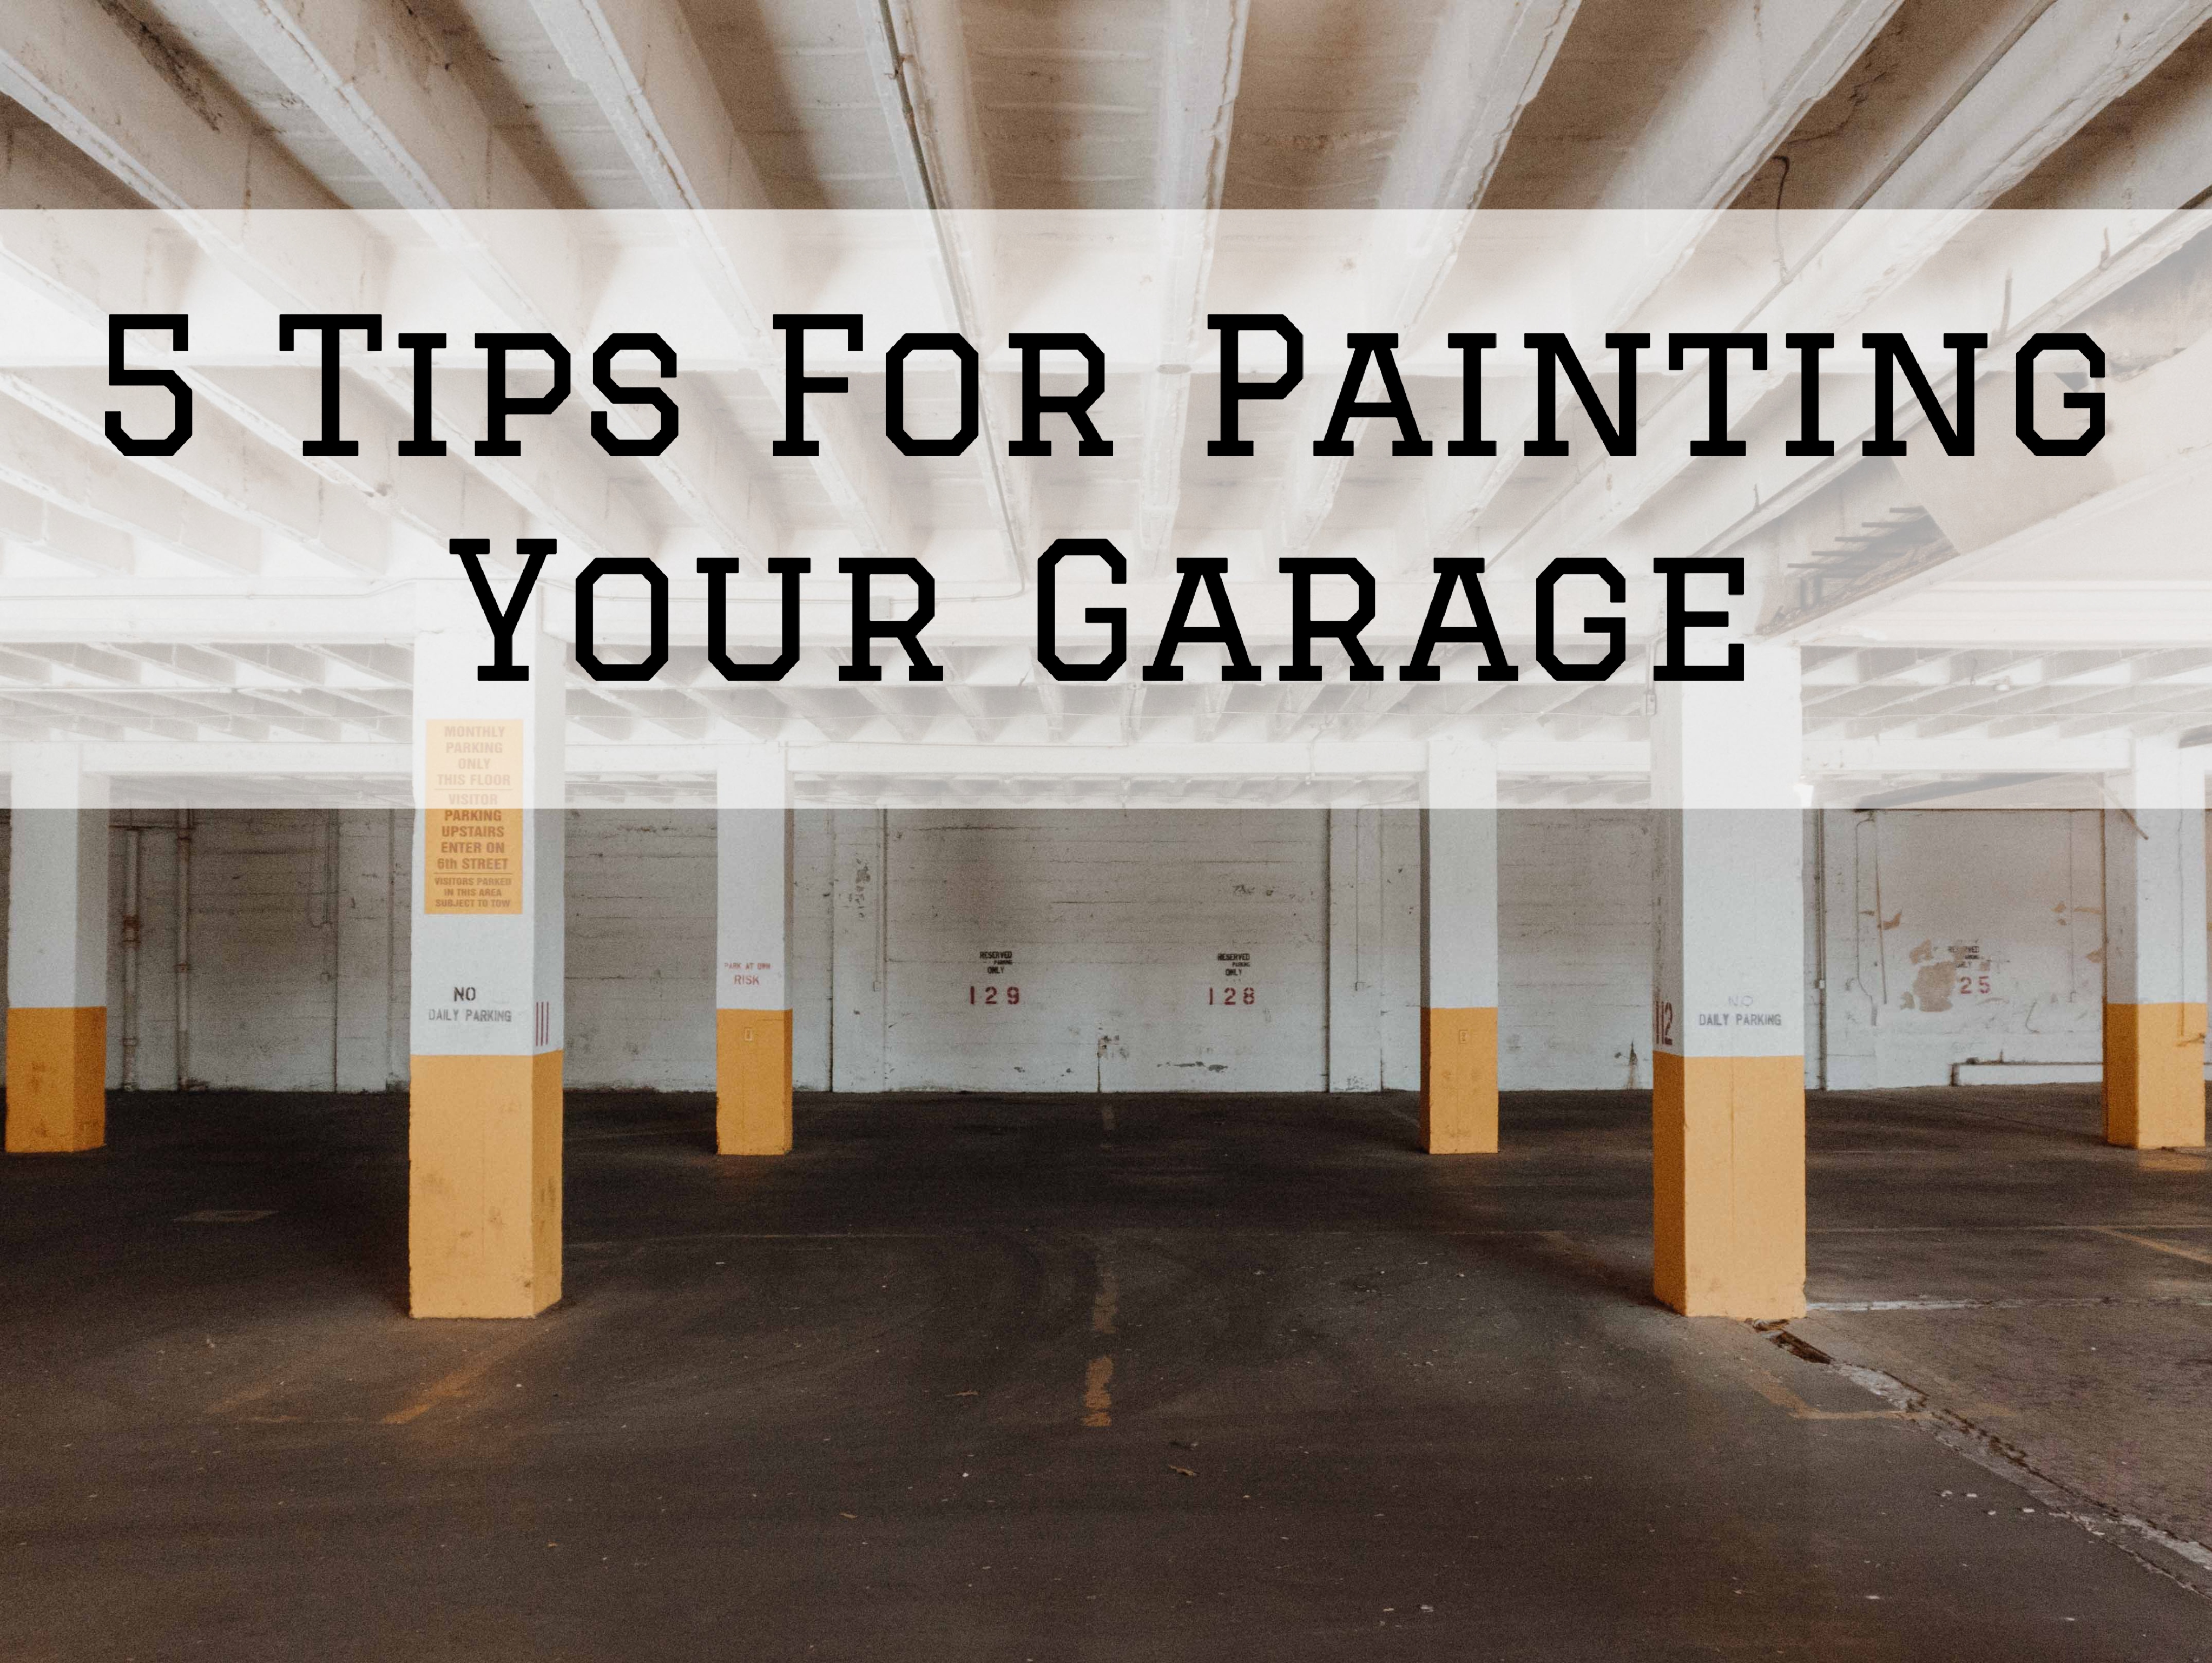 5 Tips For Painting Your Garage in Omaha, NE